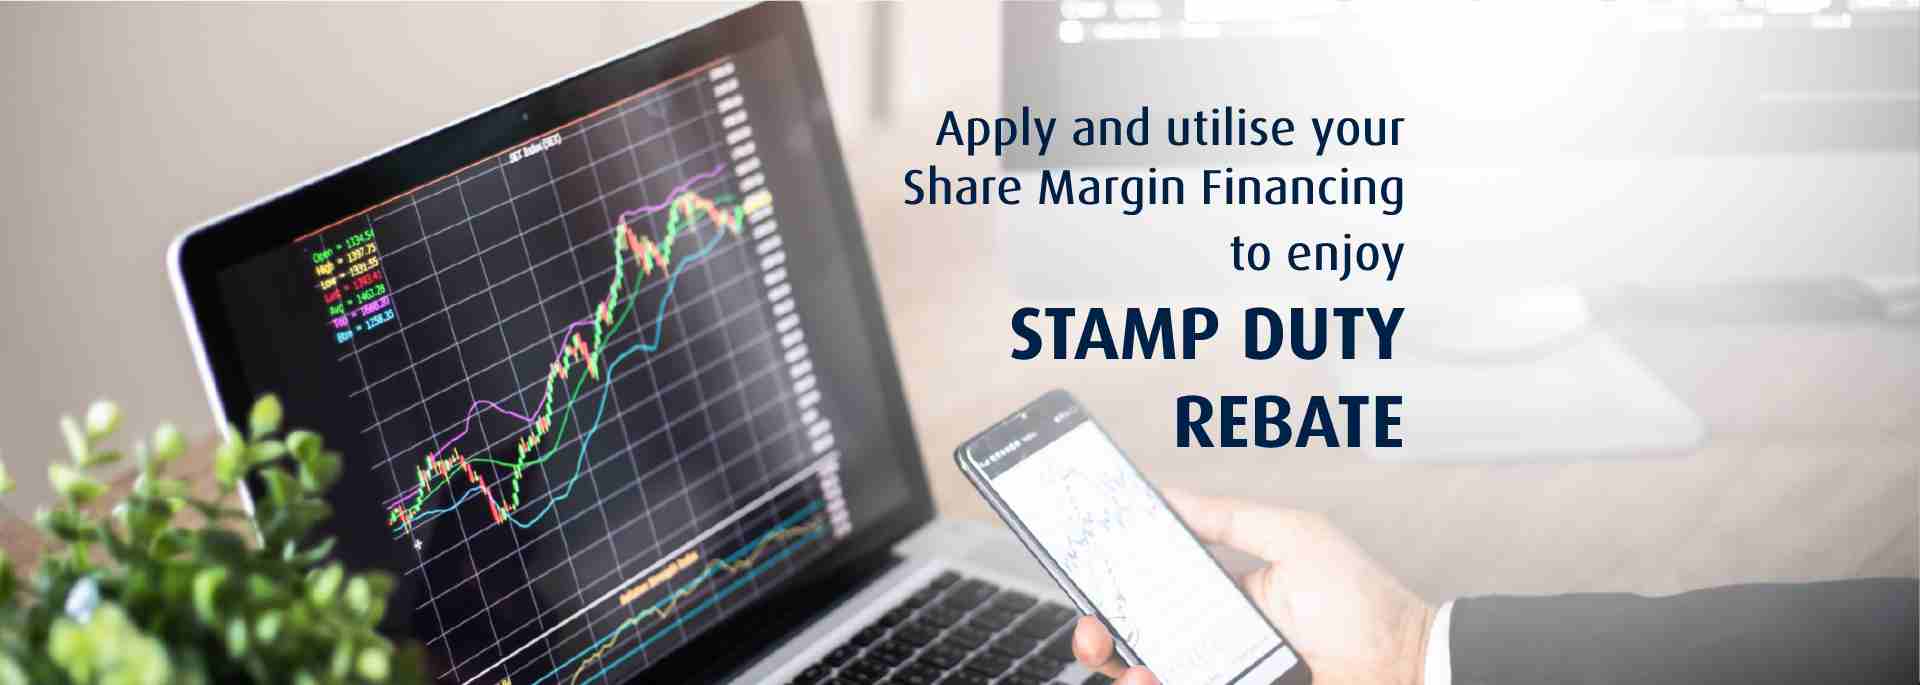 Apply and utilise your Share Margin Financing to enjoy Stamp Duty Rebate